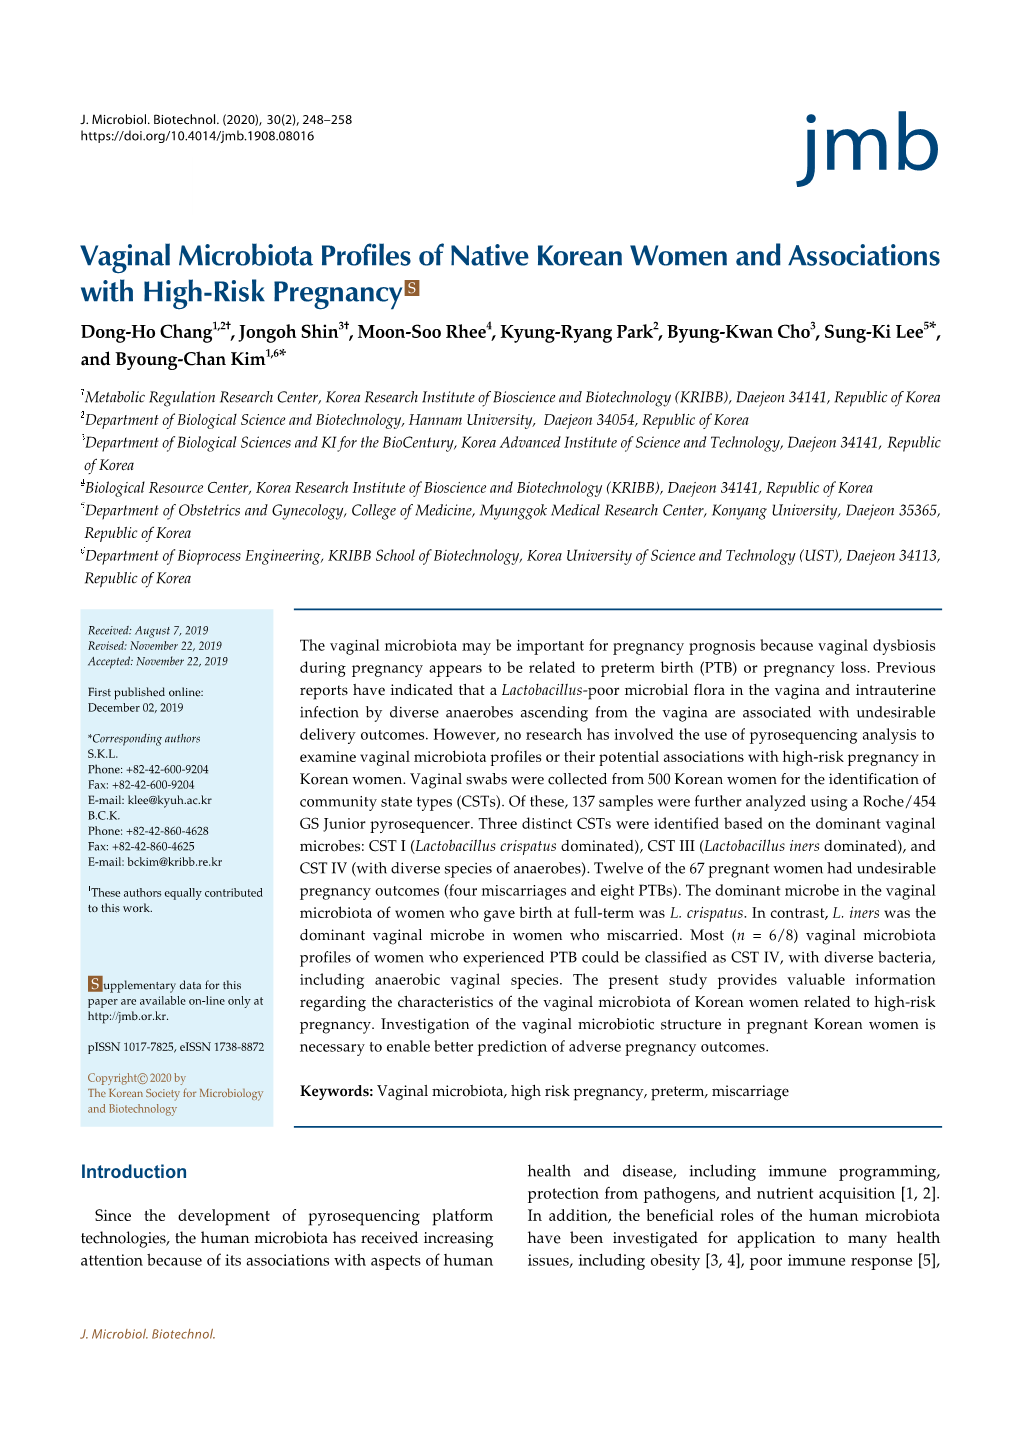 Vaginal Microbiota Profiles of Native Korean Women and Associations with High-Risk Pregnancy